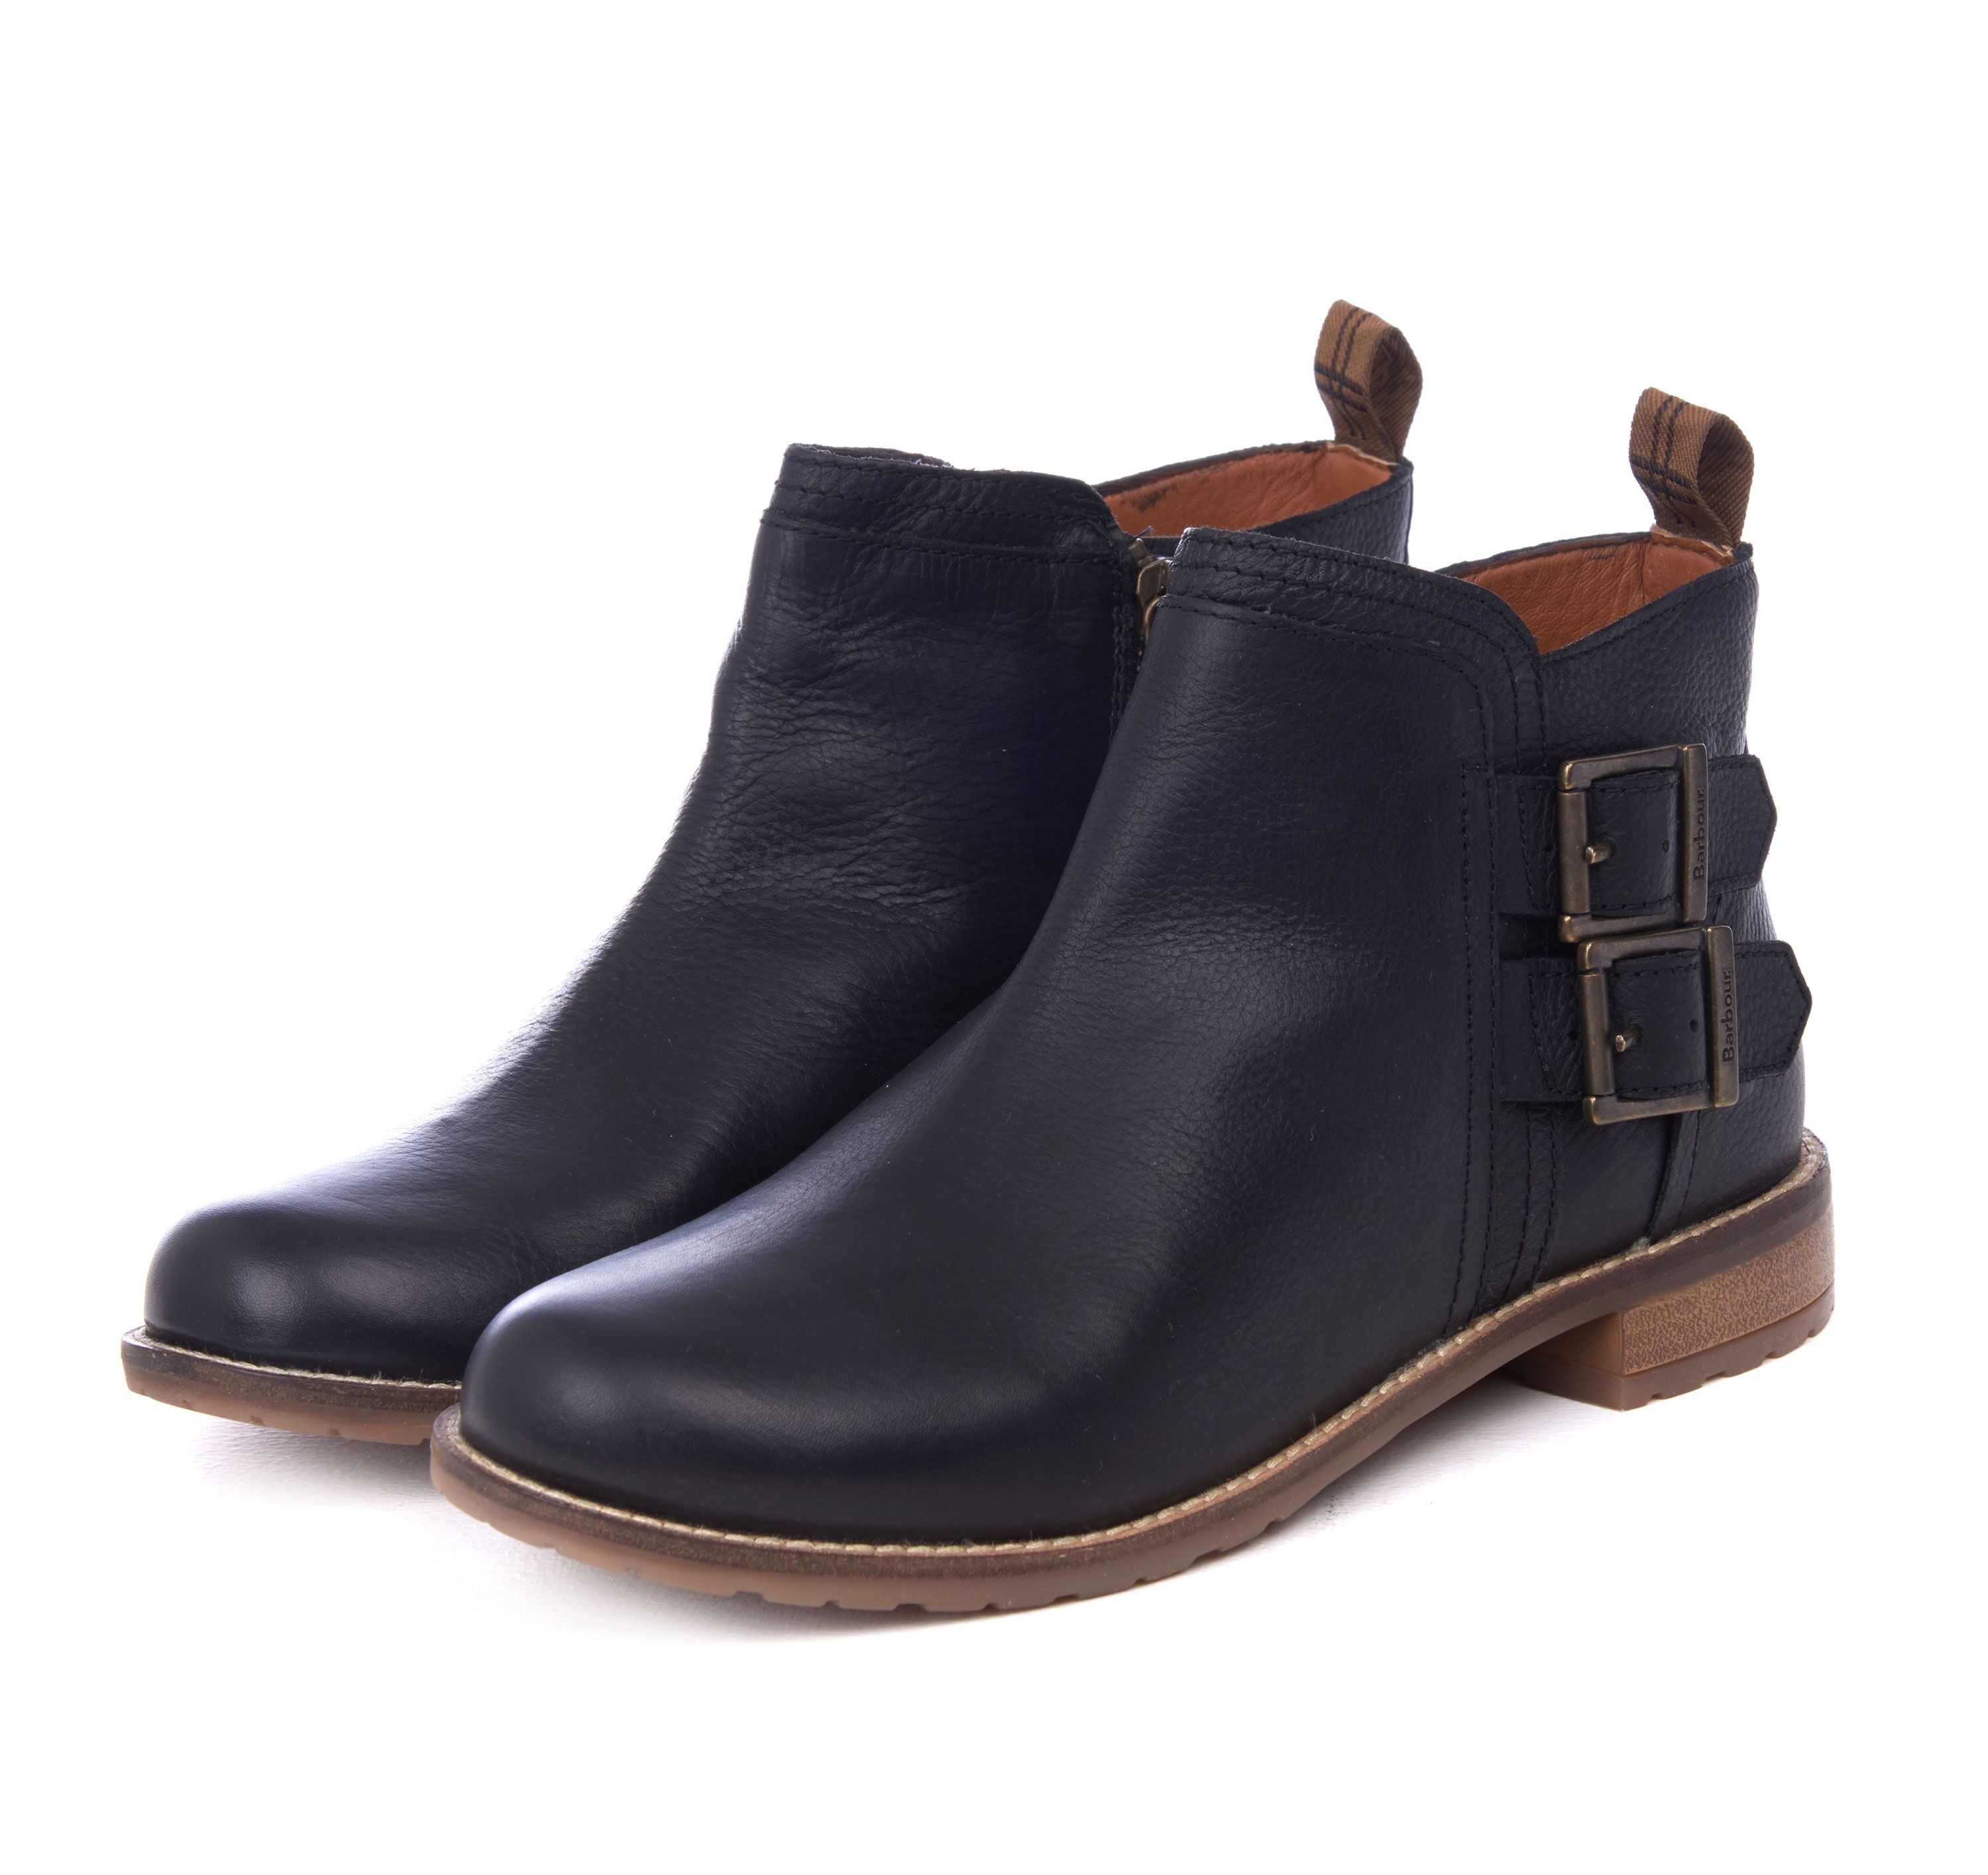 sarah low buckle boots